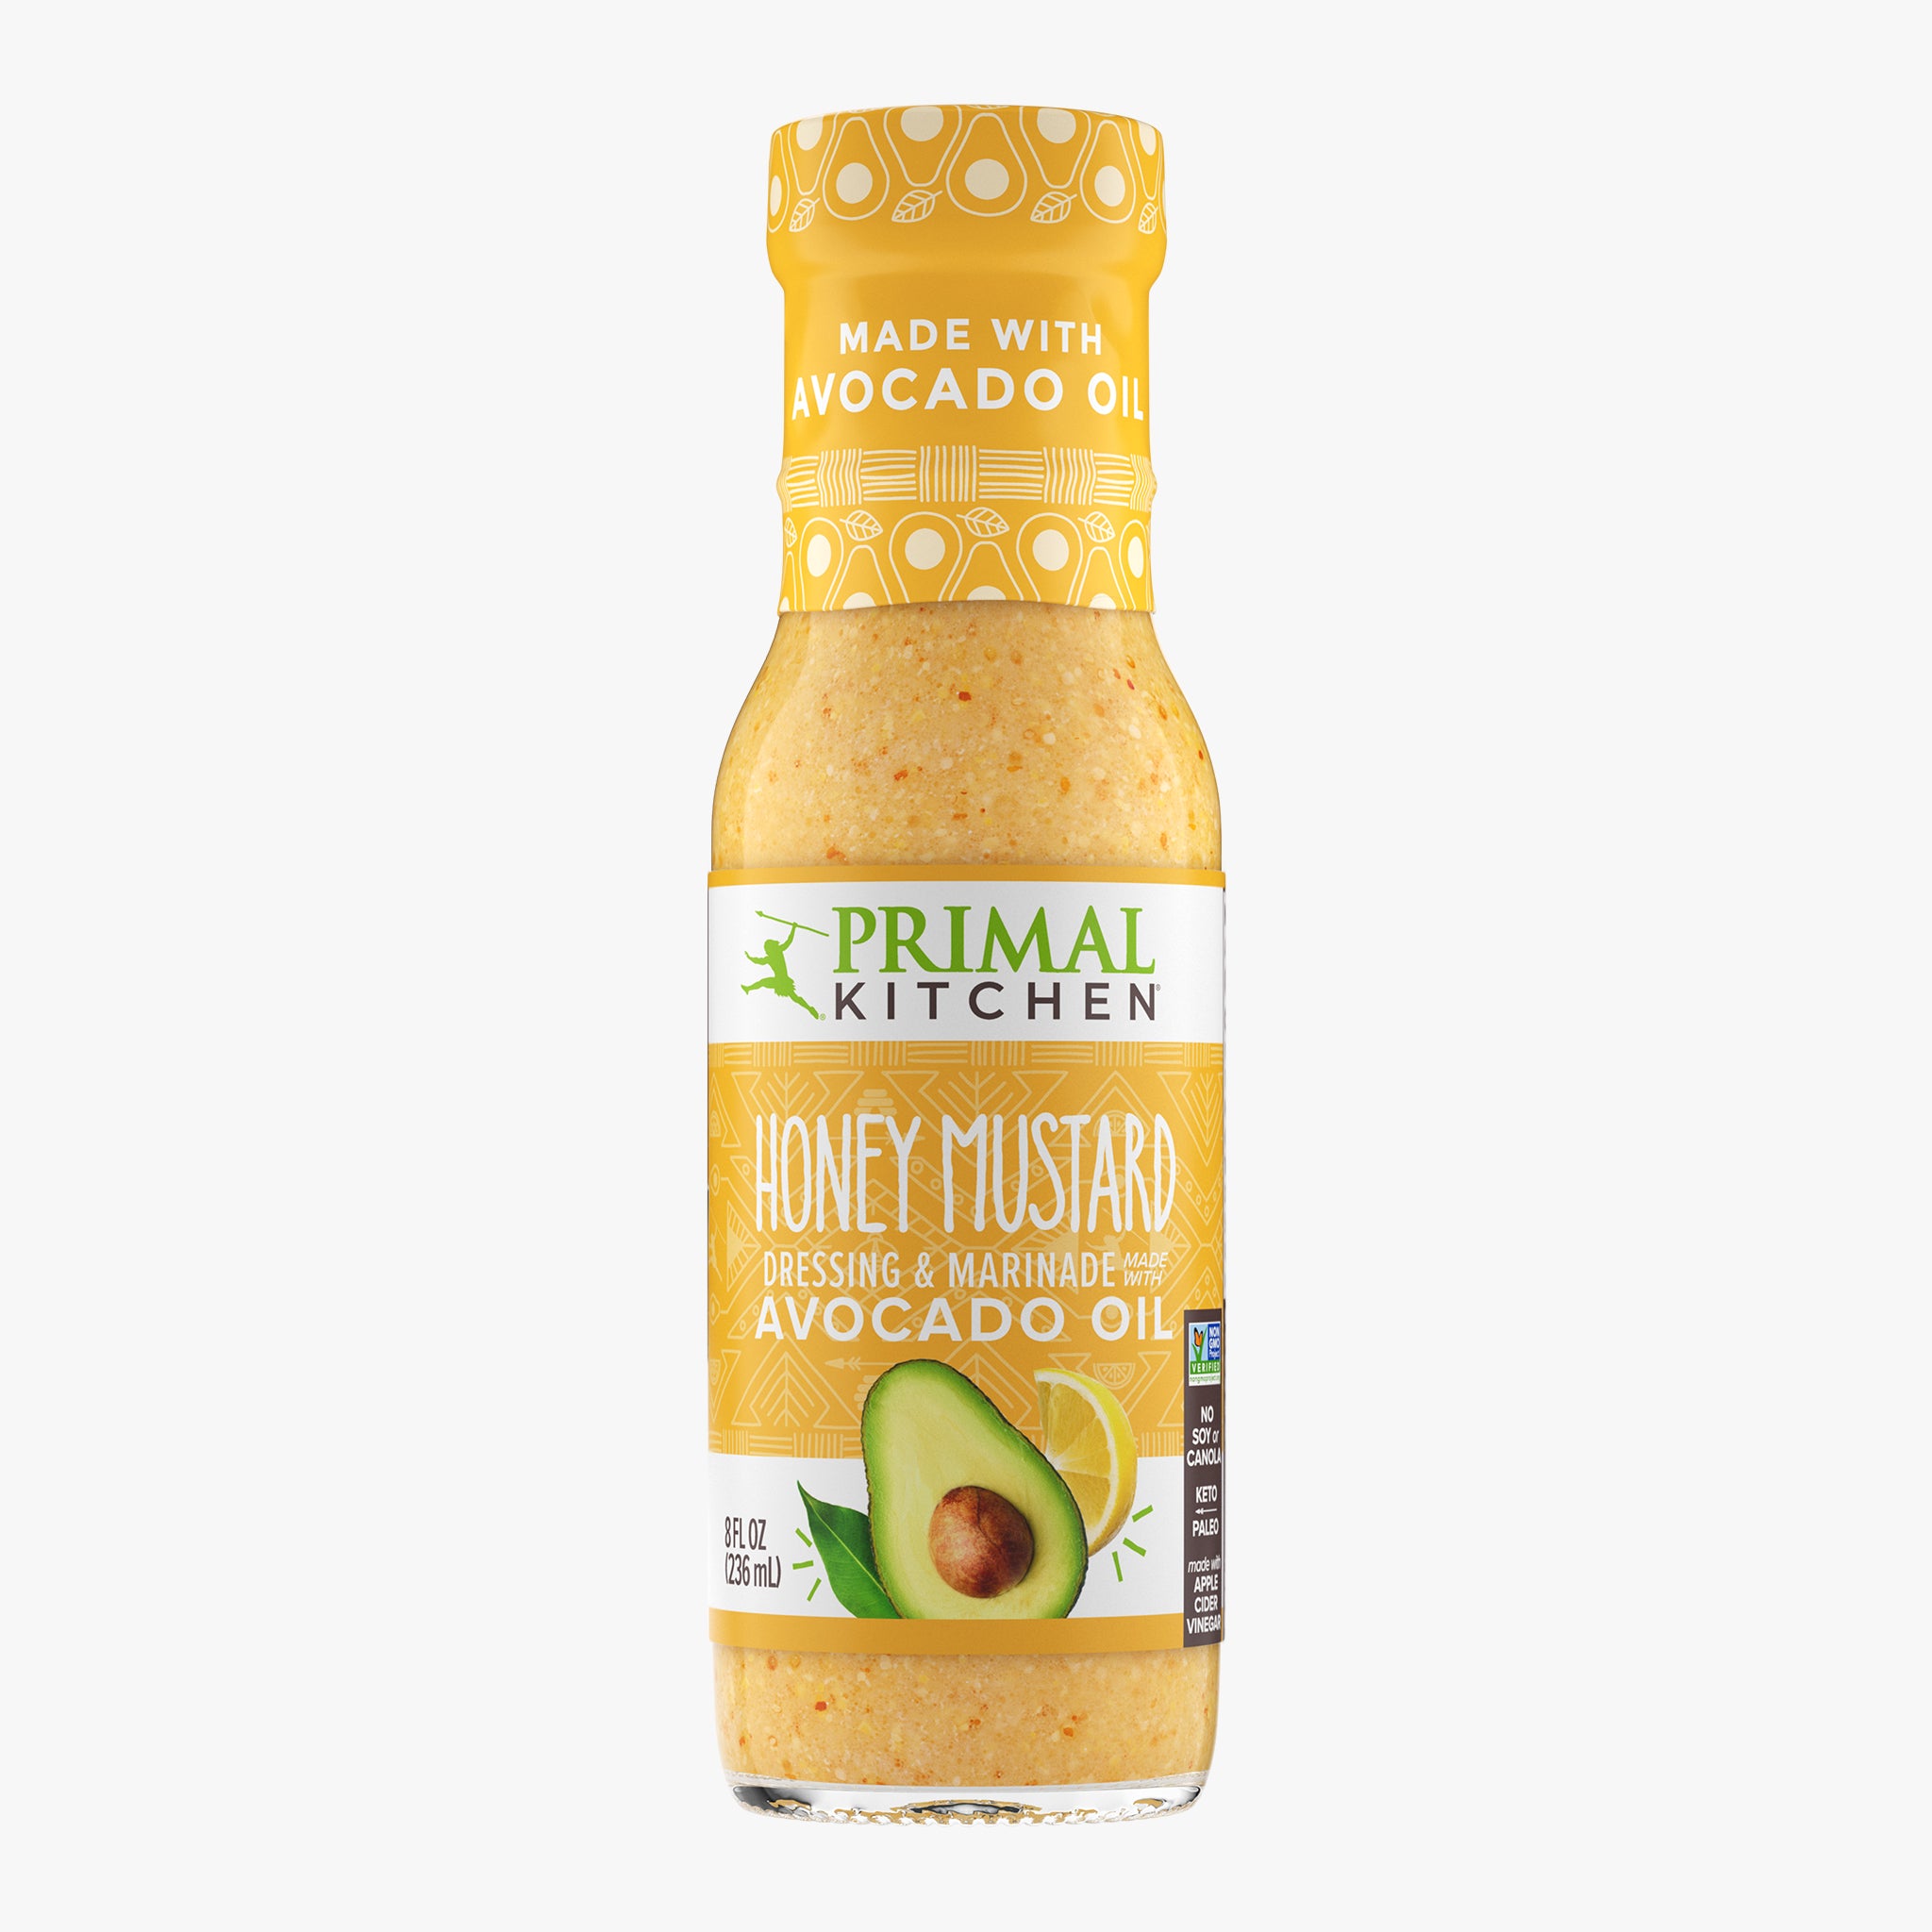 A bottle of Primal Kitchen Honey Mustard Vinaigrette and Marinade made with avocado oil, with a yellow label, on a light grey background.